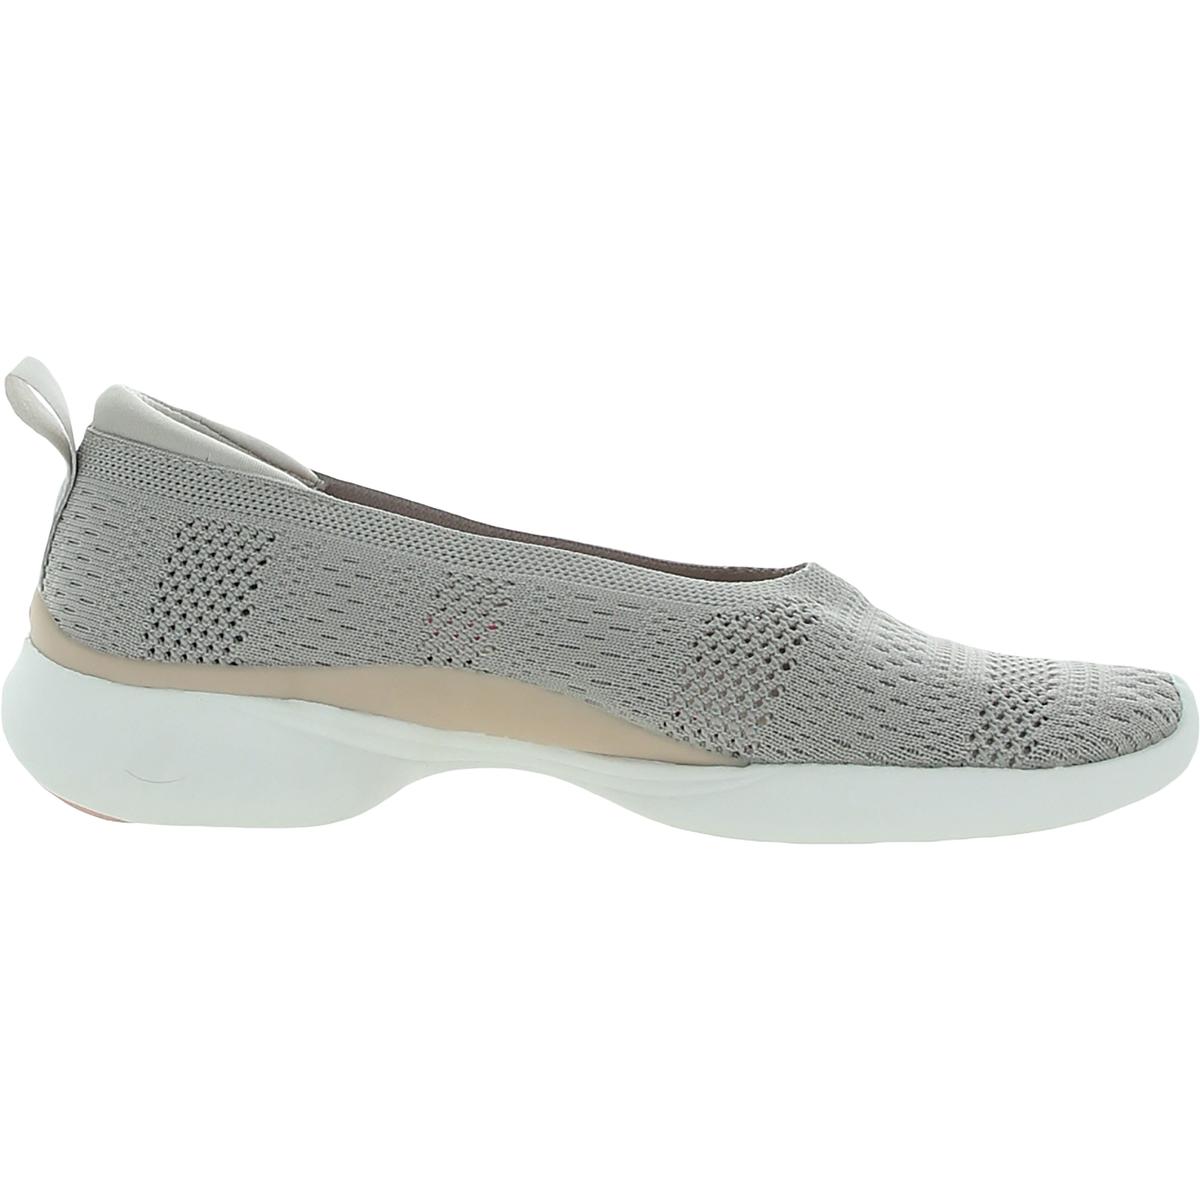 Ryka Womens Maisey Knit Perforated Walking Slip-On Sneakers Shoes BHFO ...